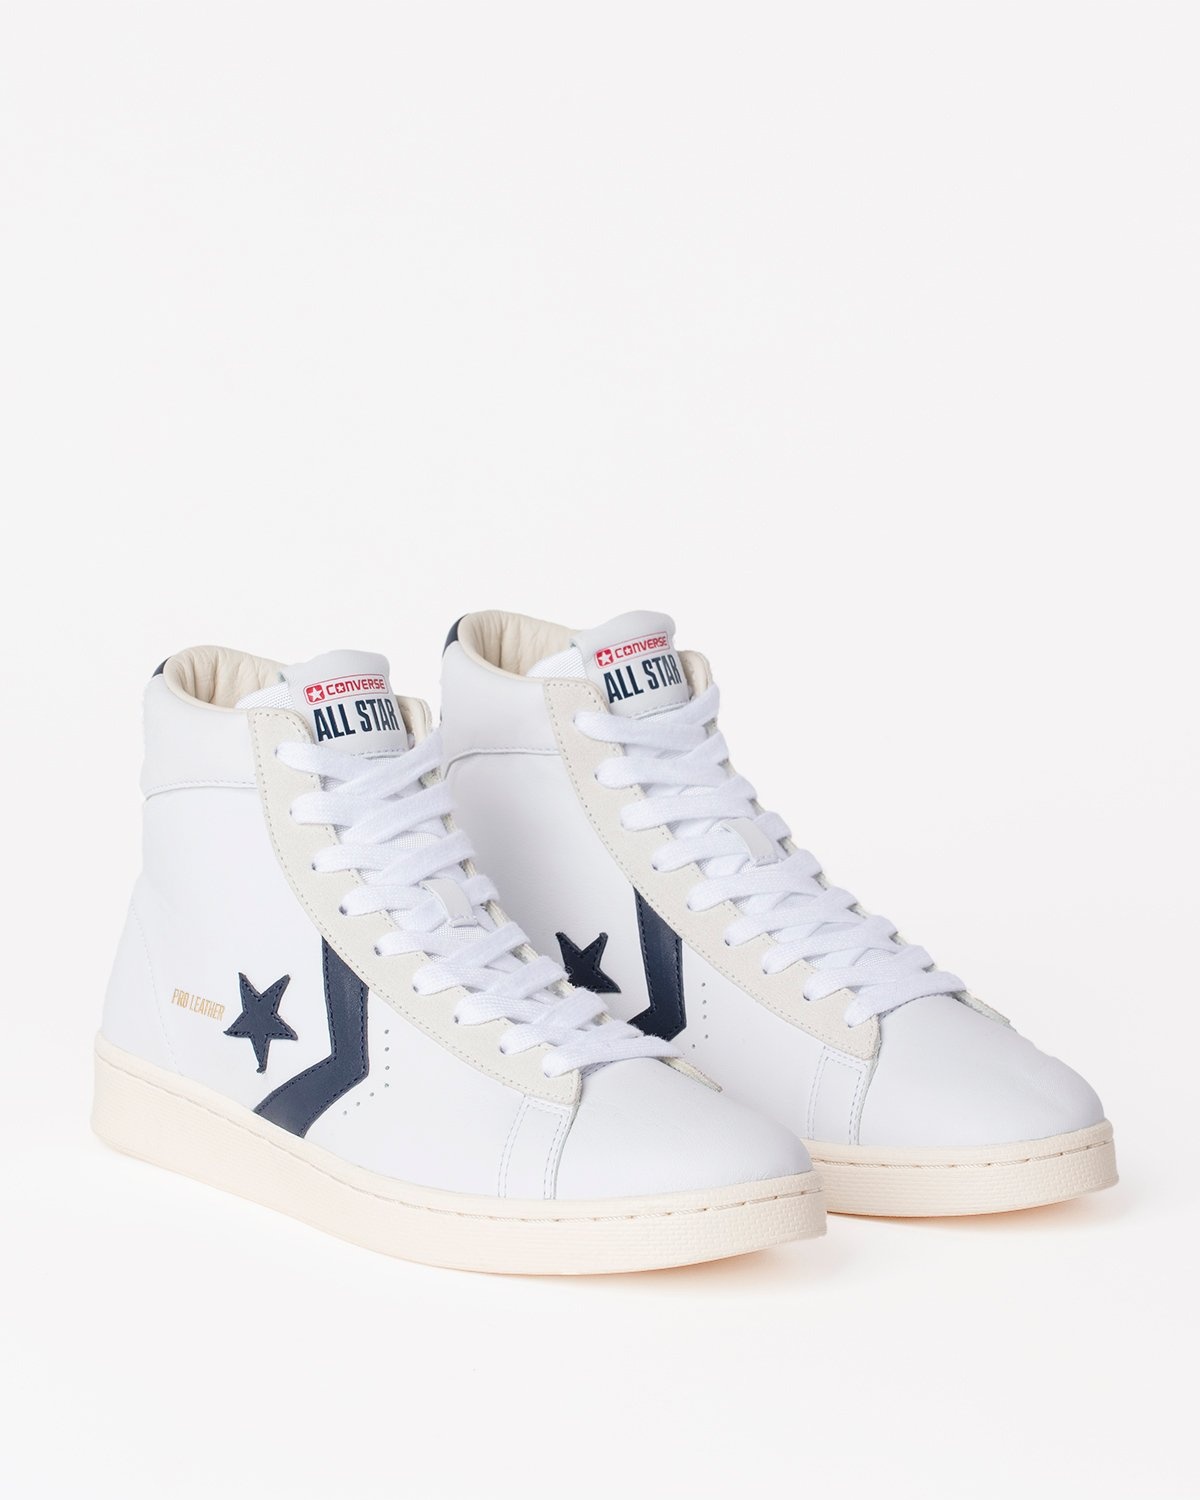 Converse – Pro Leather OG Mid White/Obsidian/Egret - High Top Sneakers - White - Image 5